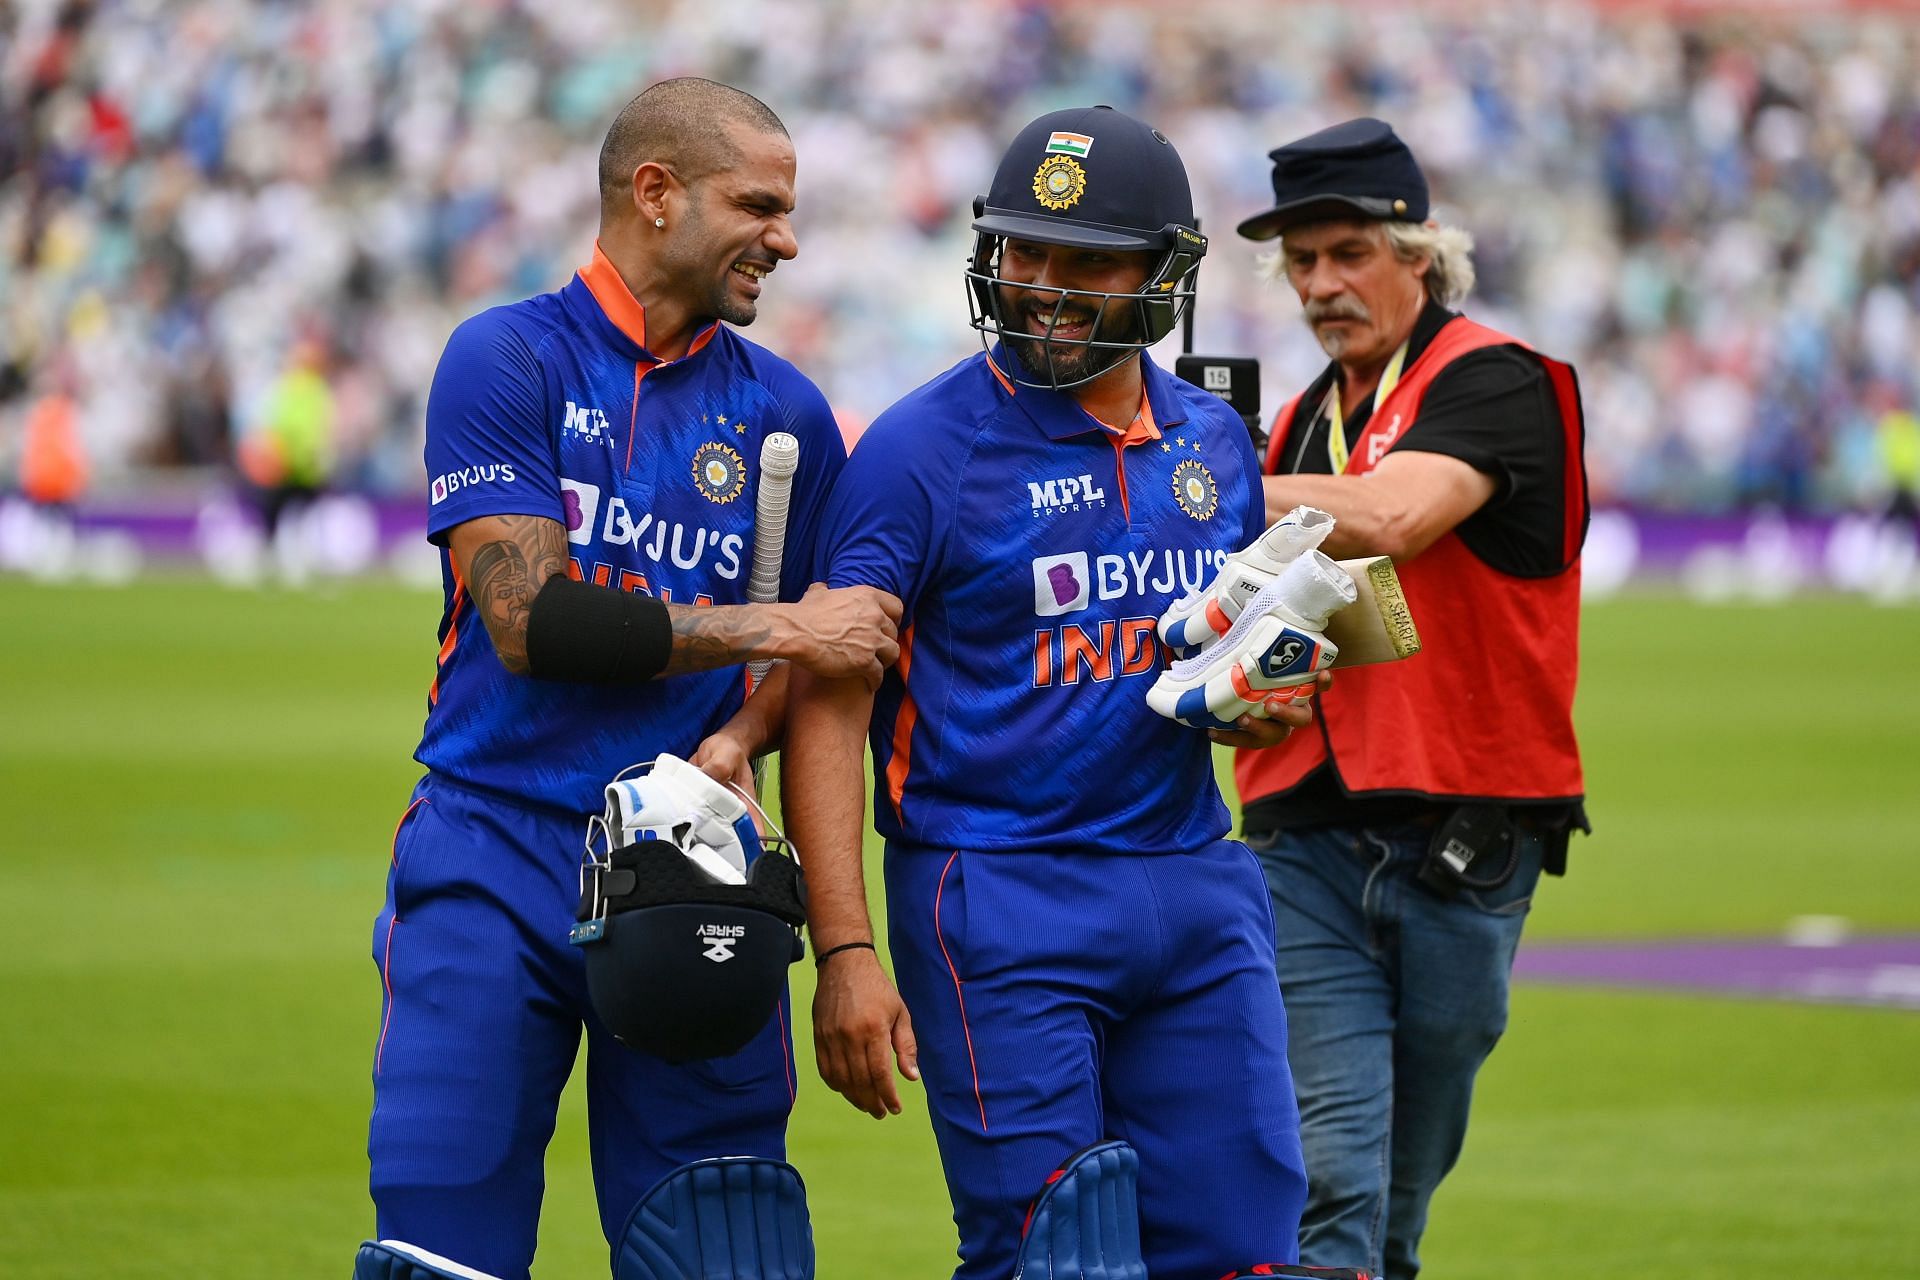 Shikhar Dhawan and Rohit Sharma have been an extremely successful opening pair